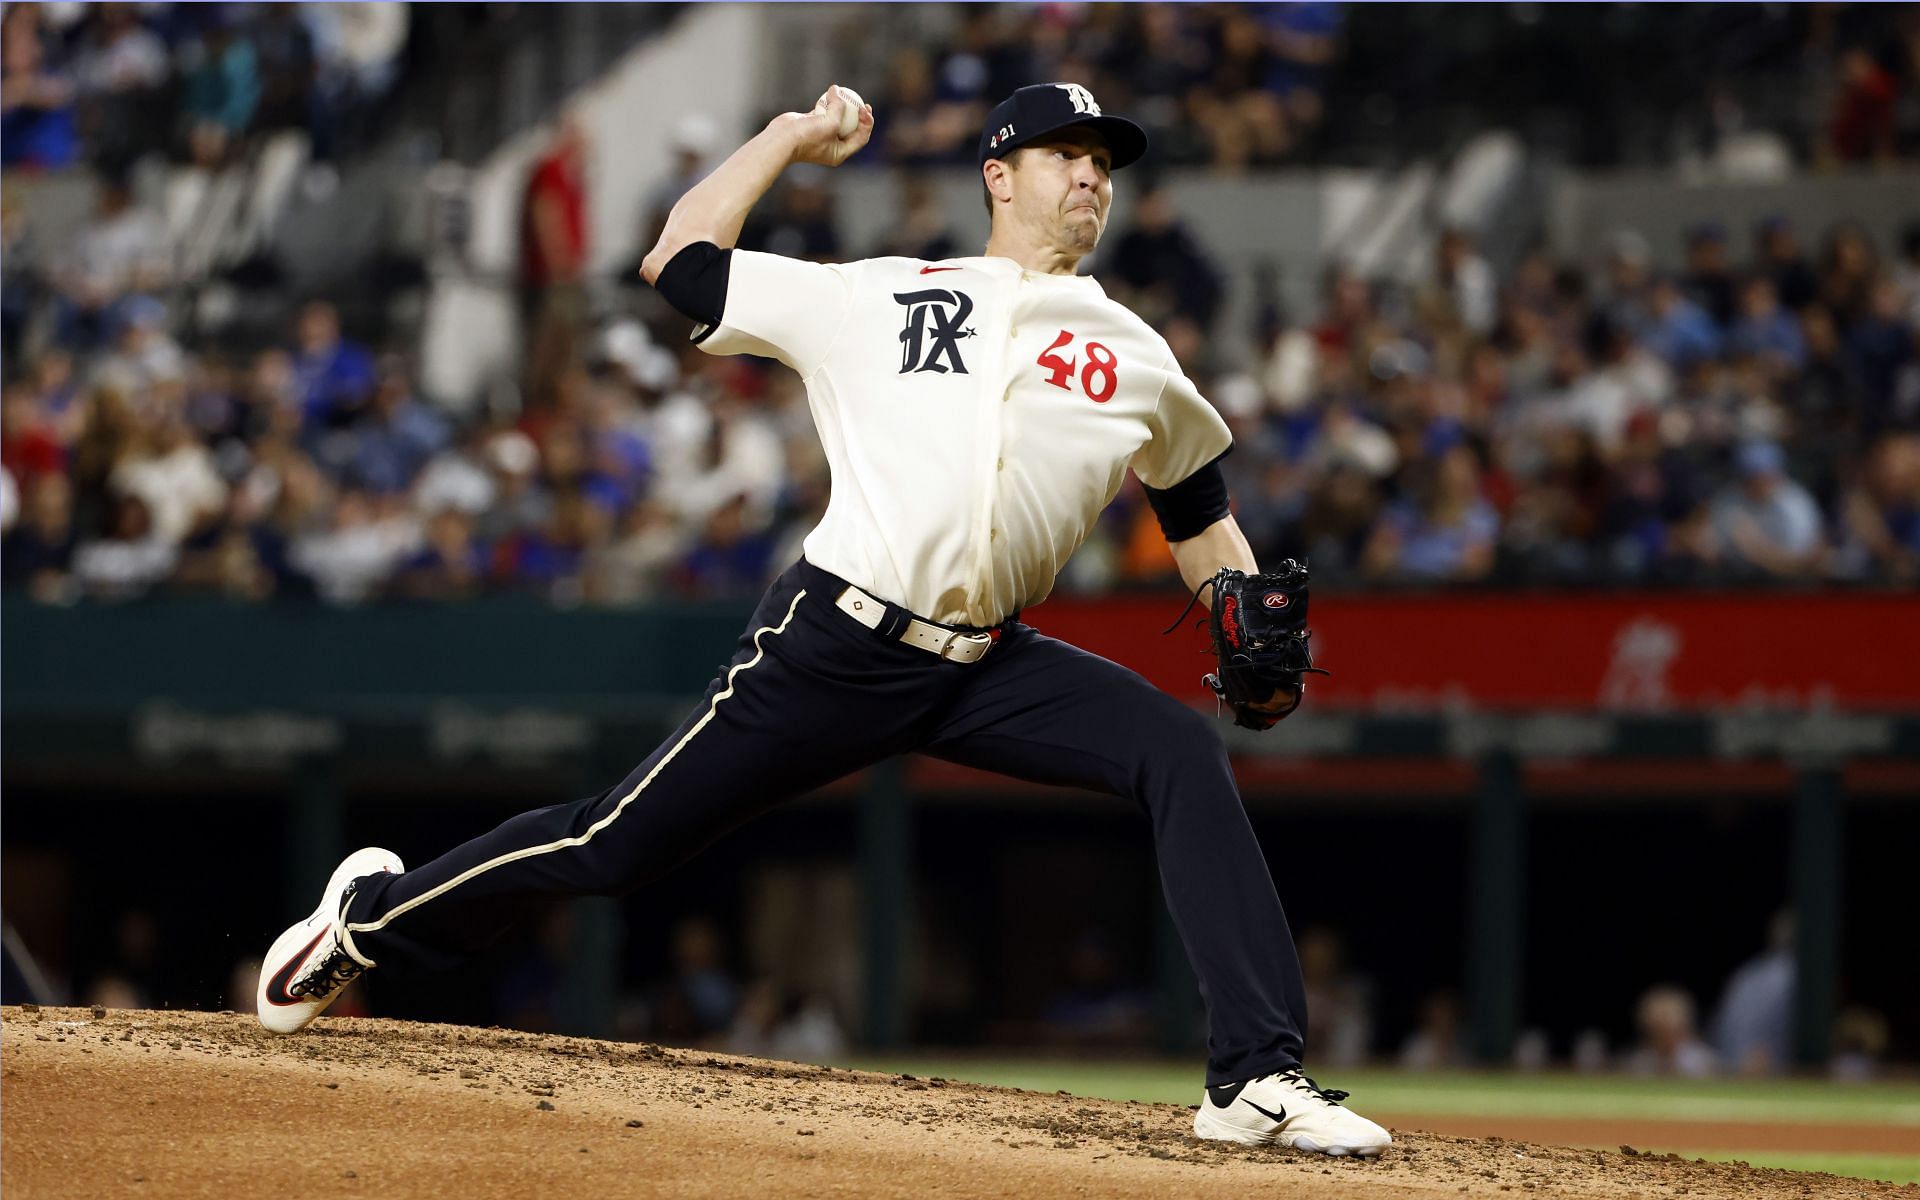 Jacob deGrom #48 of the Texas Rangers pitches against the New York Yankees during the fourth inning at Globe Life Field on April 28, 2023, in Arlington, Texas. (Photo by Ron Jenkins/Getty Images)